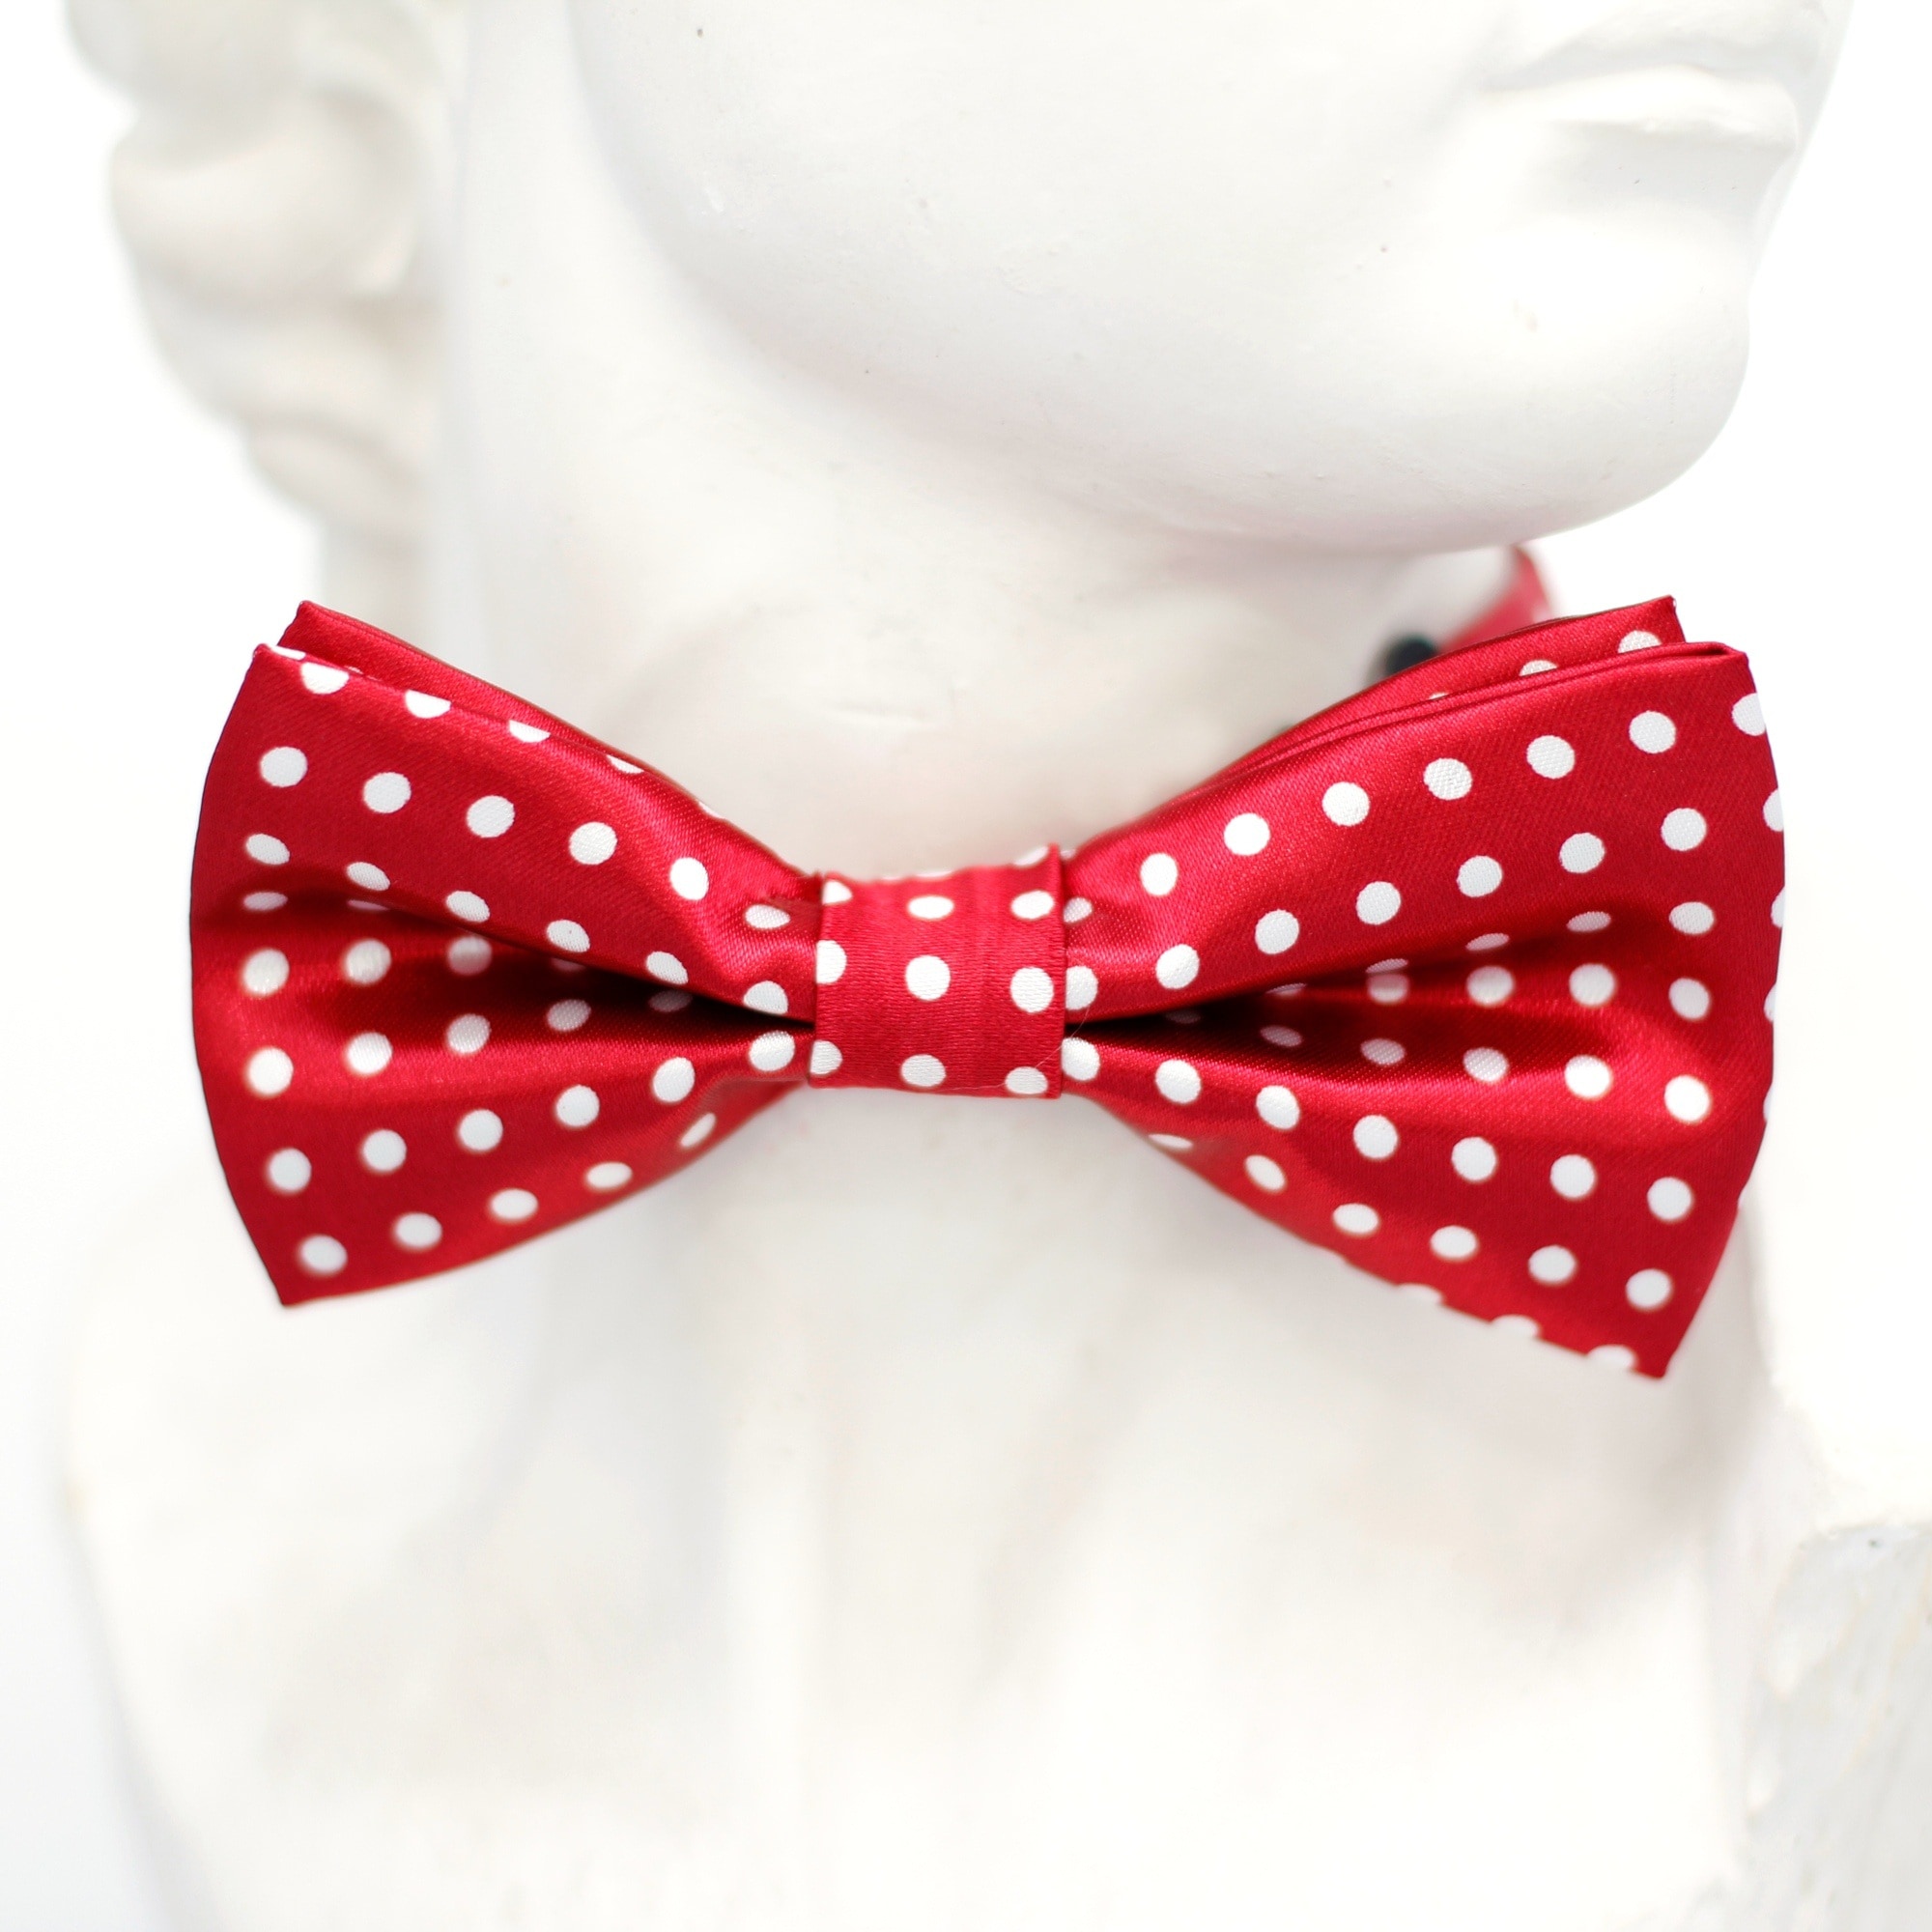 Tie, Red, Loop, Fly, Points, White, polka dot, spotted